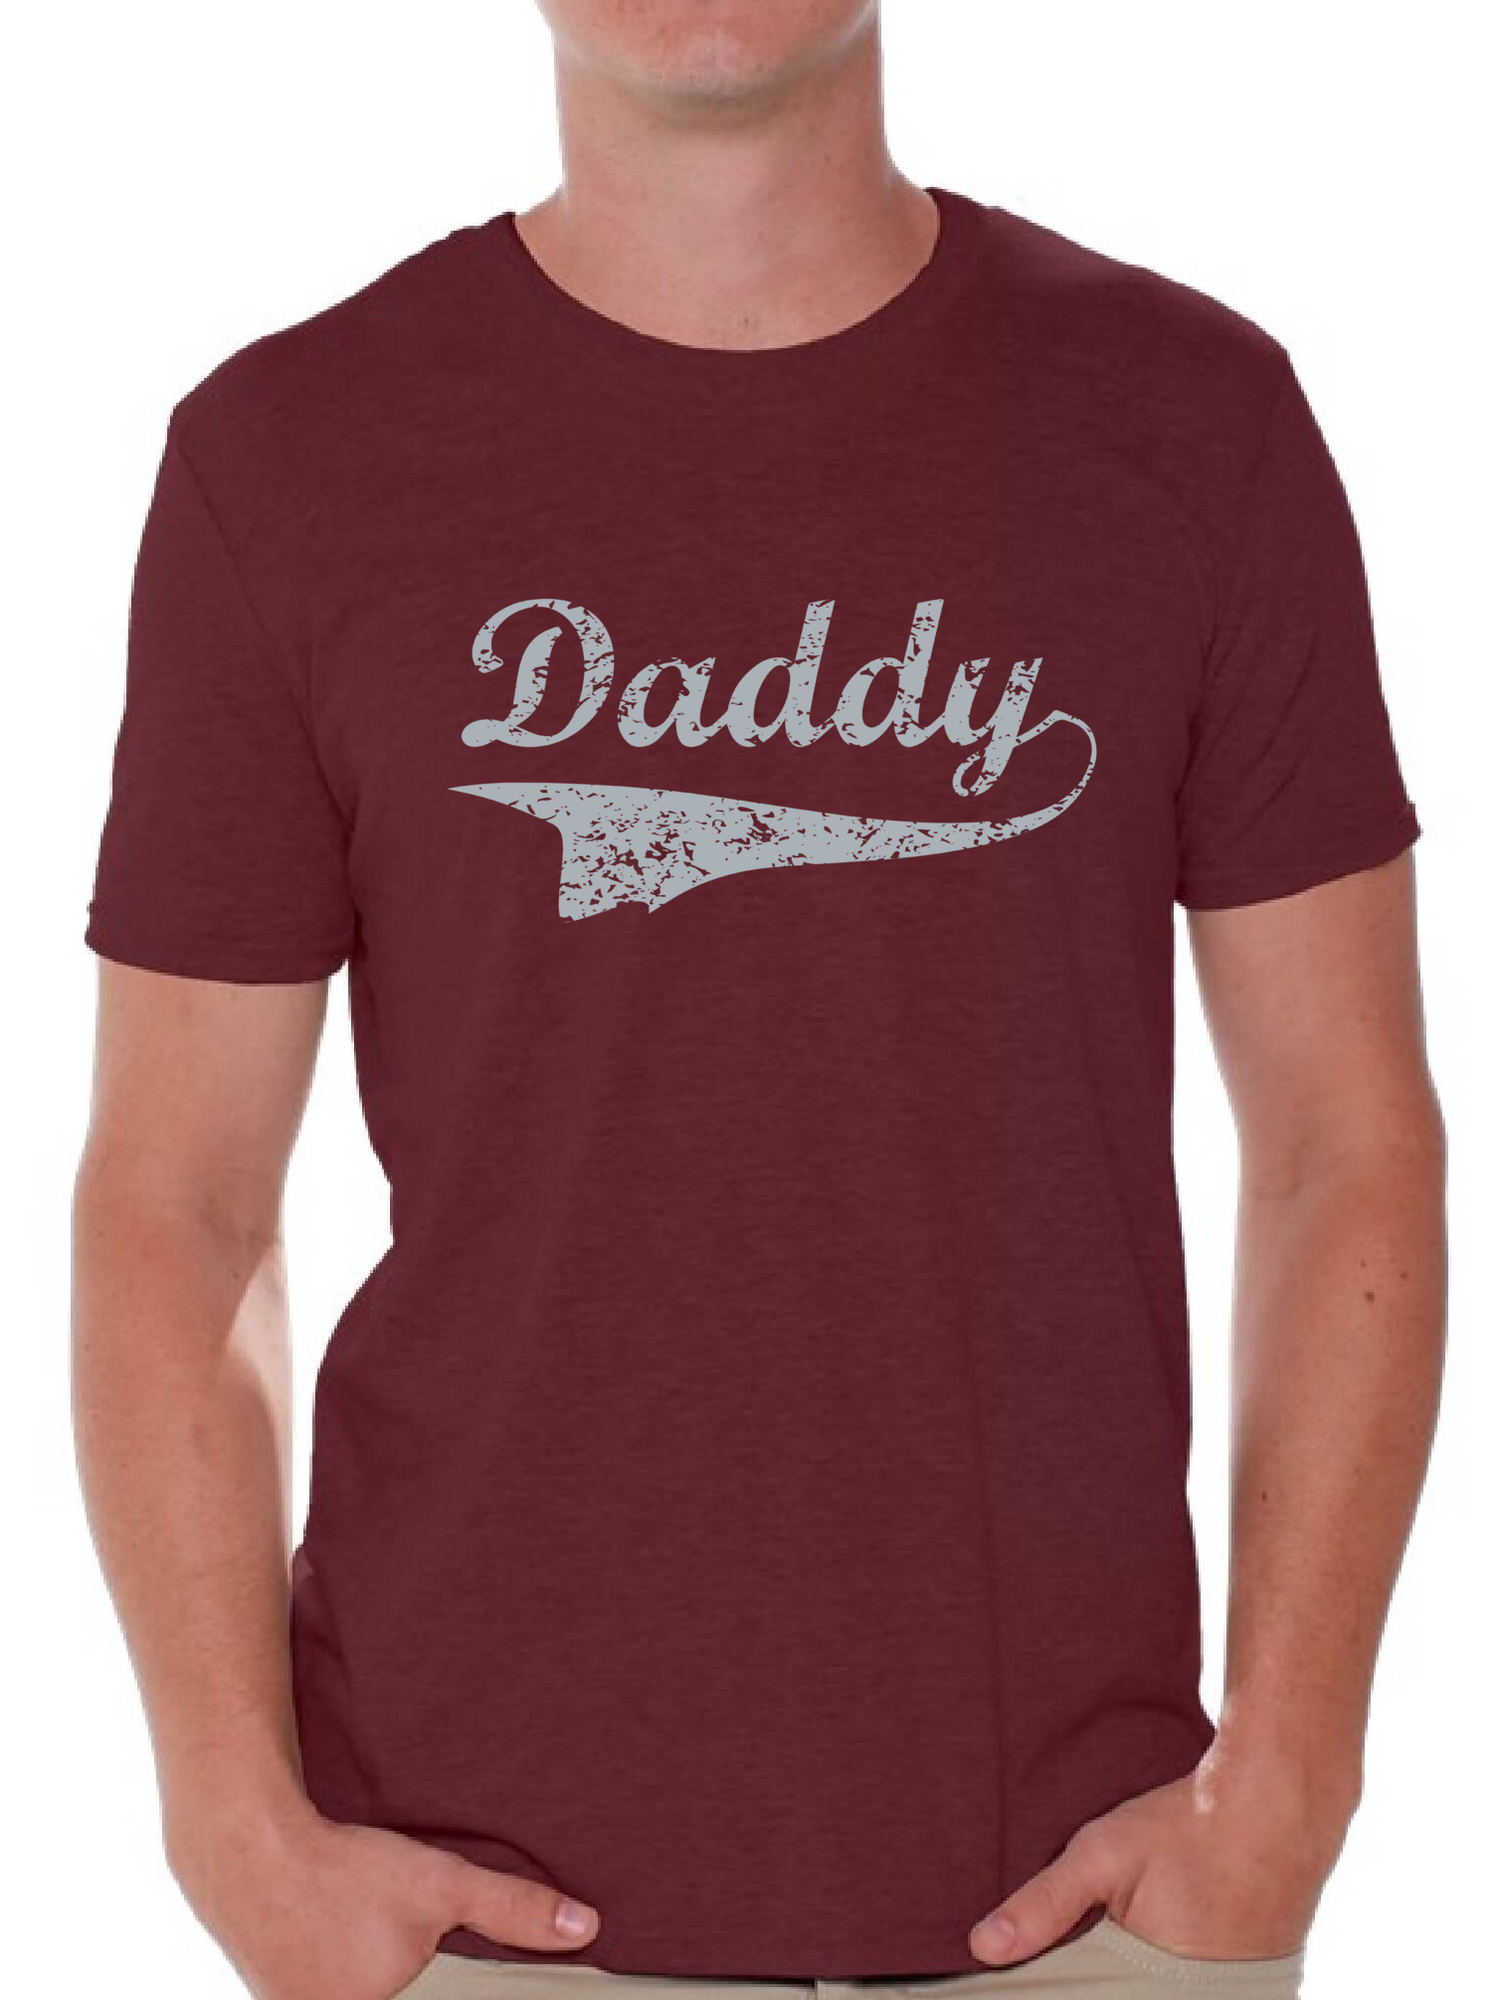 Awkward Styles Men's Daddy Graphic T-shirt Tops Vintage Father`s Day Gift for Dad - image 1 of 4